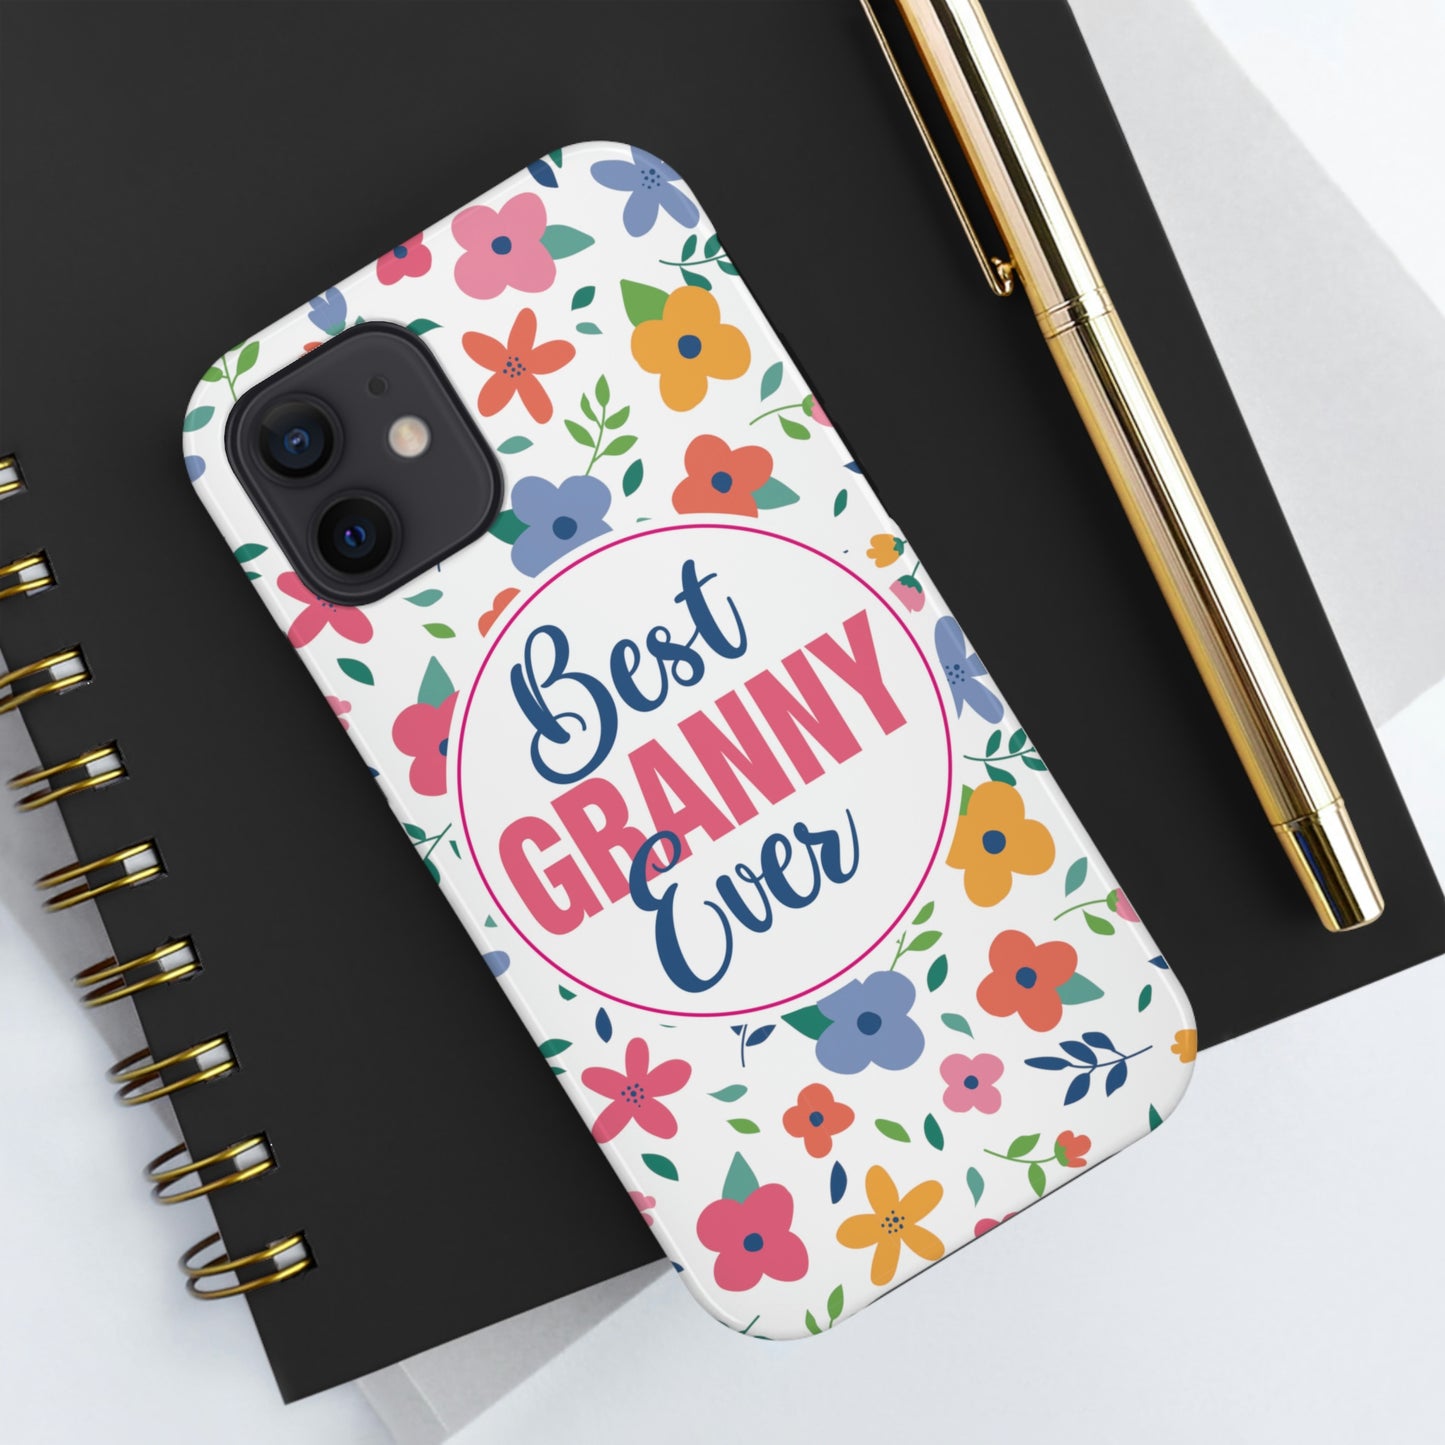 Best Granny Ever Tough Phone Cases by Case-Mate, Mothers Day Gift